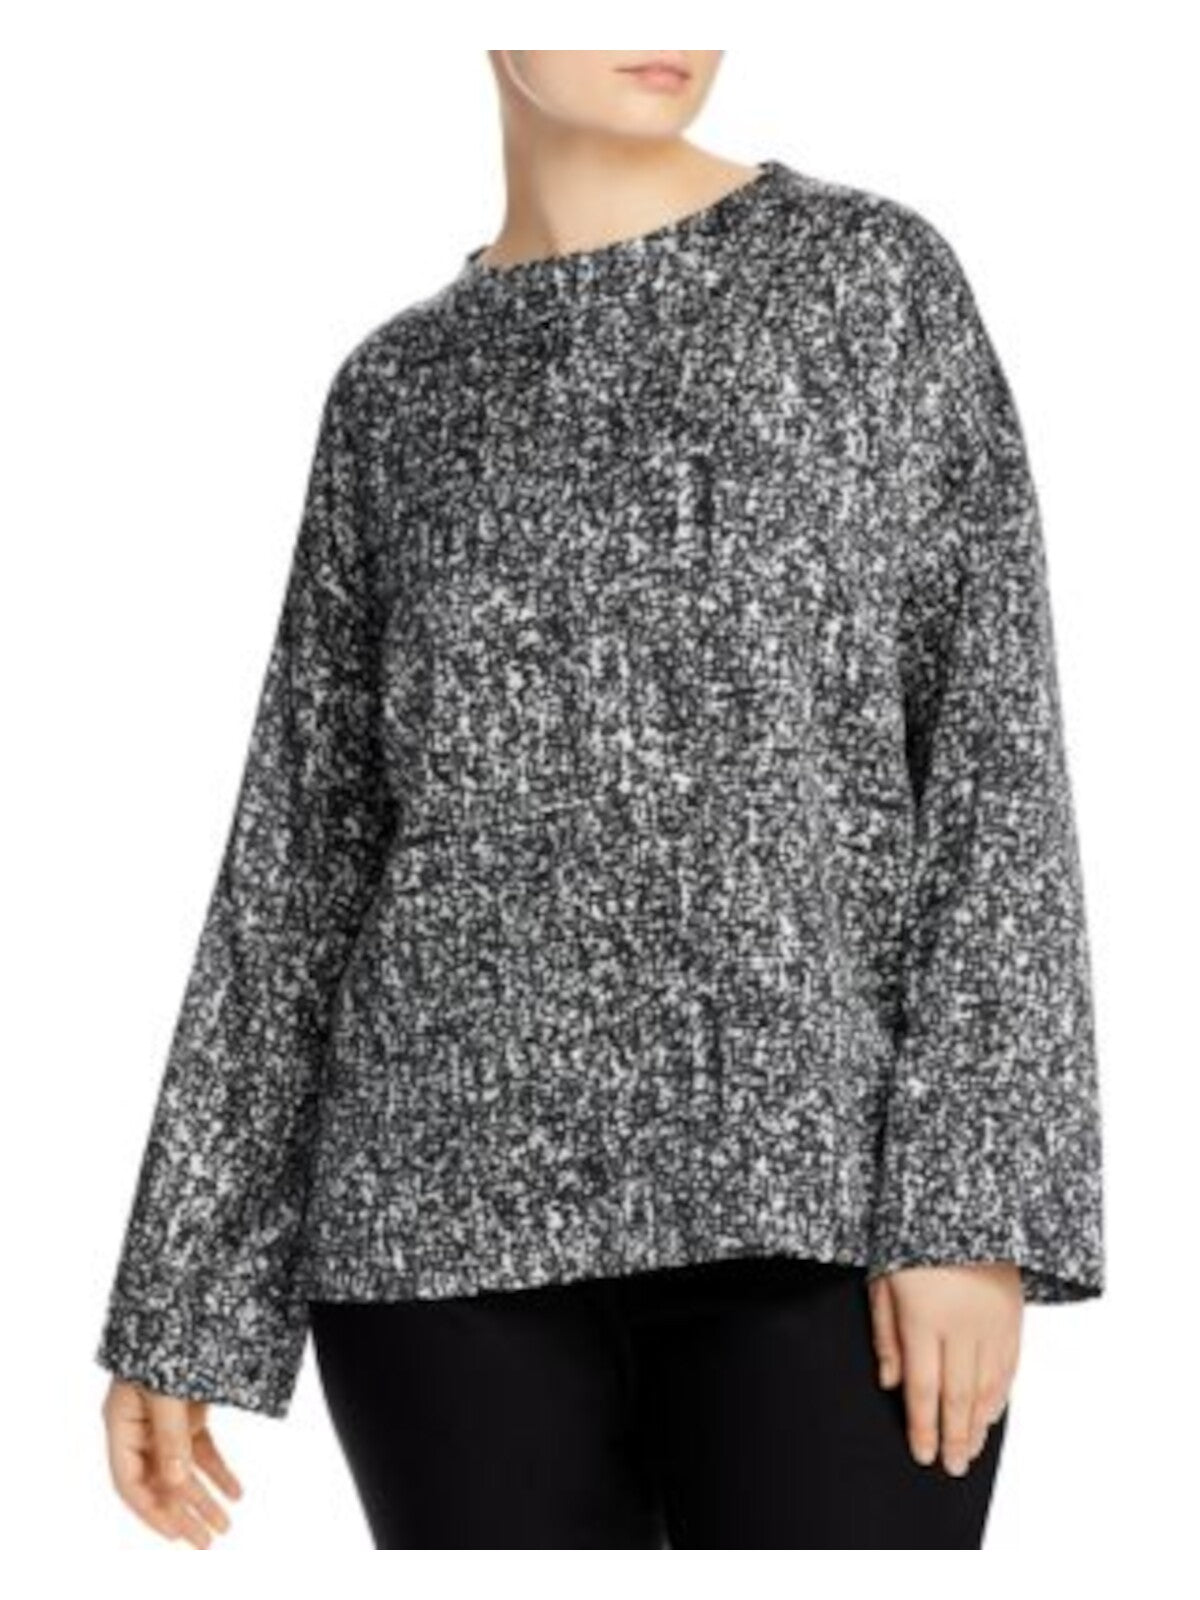 EILEEN FISHER Womens Black Printed Long Sleeve V Neck Wear To Work Blouse XL